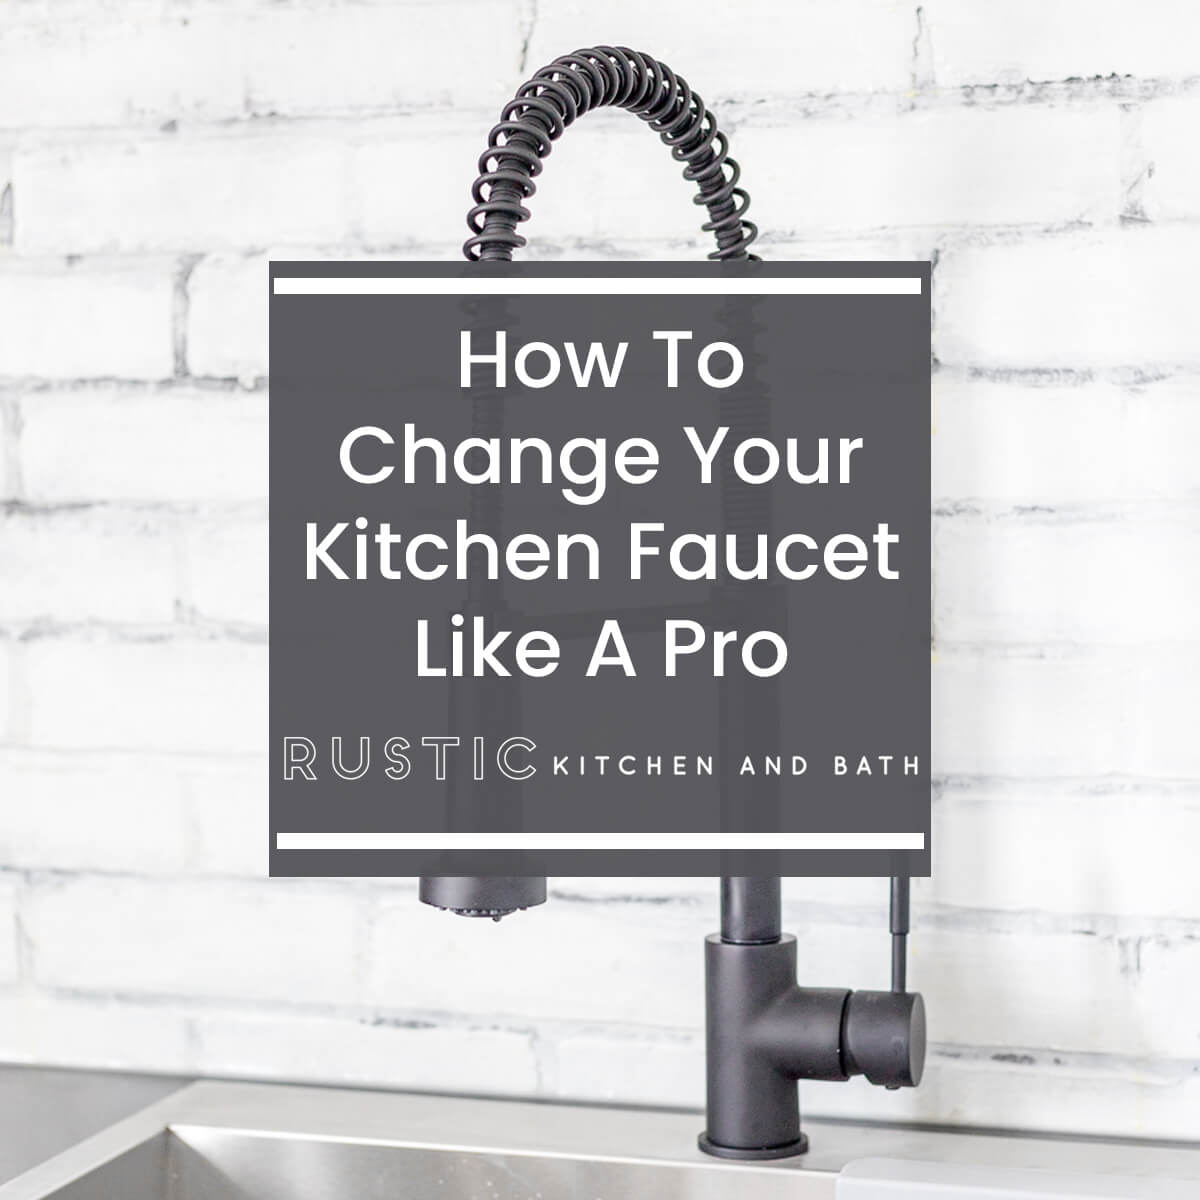 How To Change Your Kitchen Faucet Like A Pro